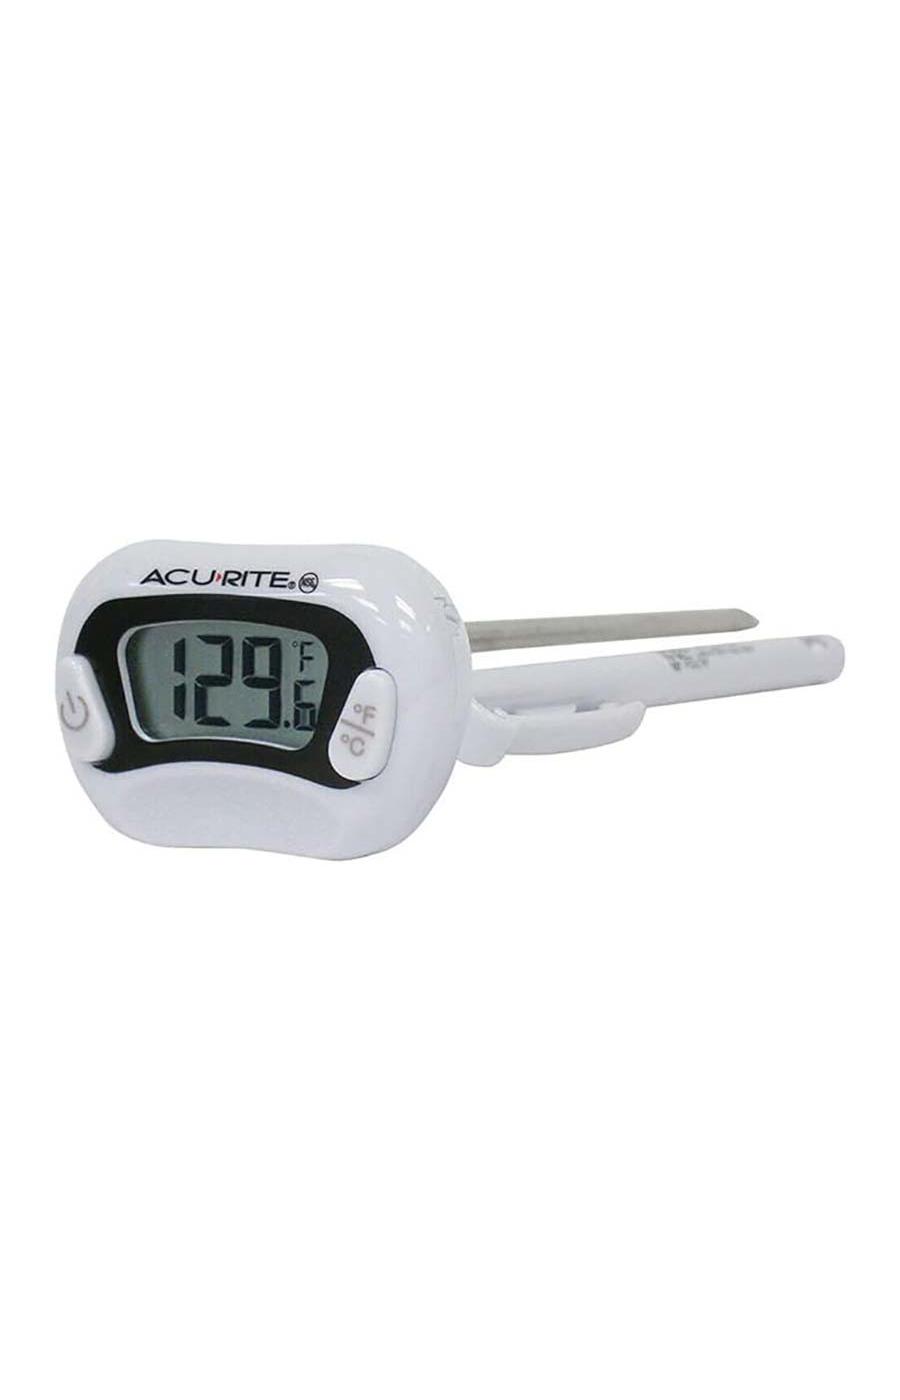 AcuRite Digital Instant Read Meat Thermometer; image 2 of 2